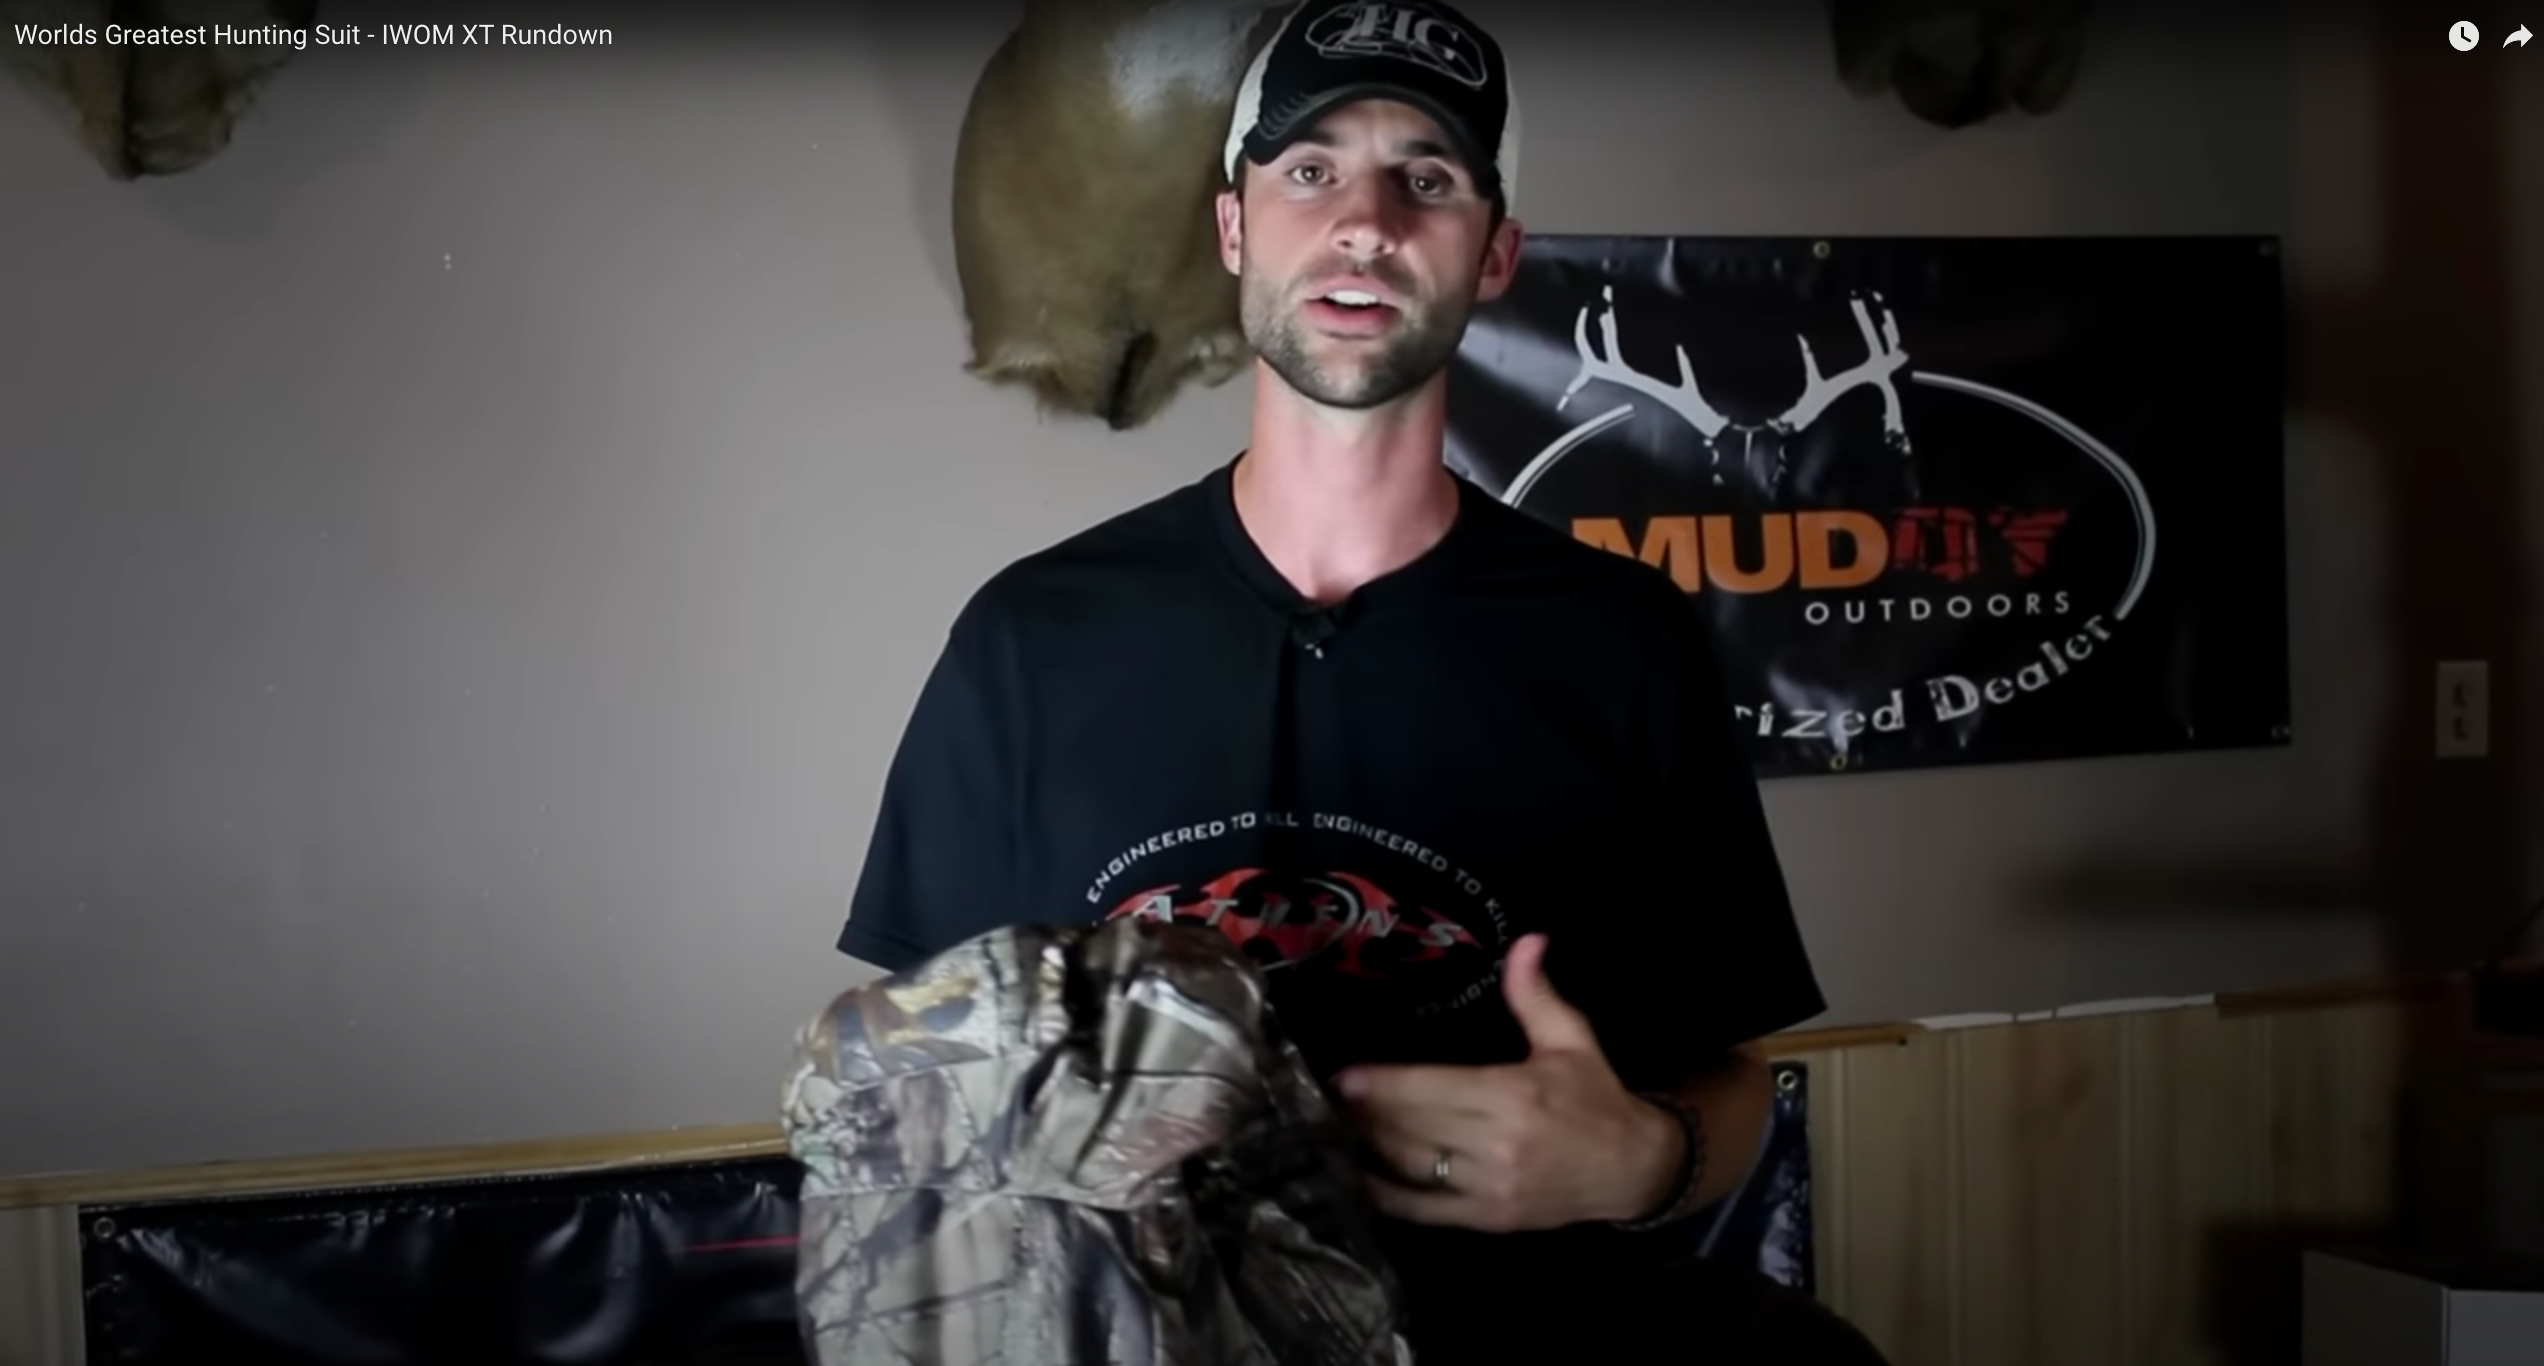 Load video: IWOM XT Insulated Hunting Suit Overview Great for cold weather Archery and Rifle Deer Season